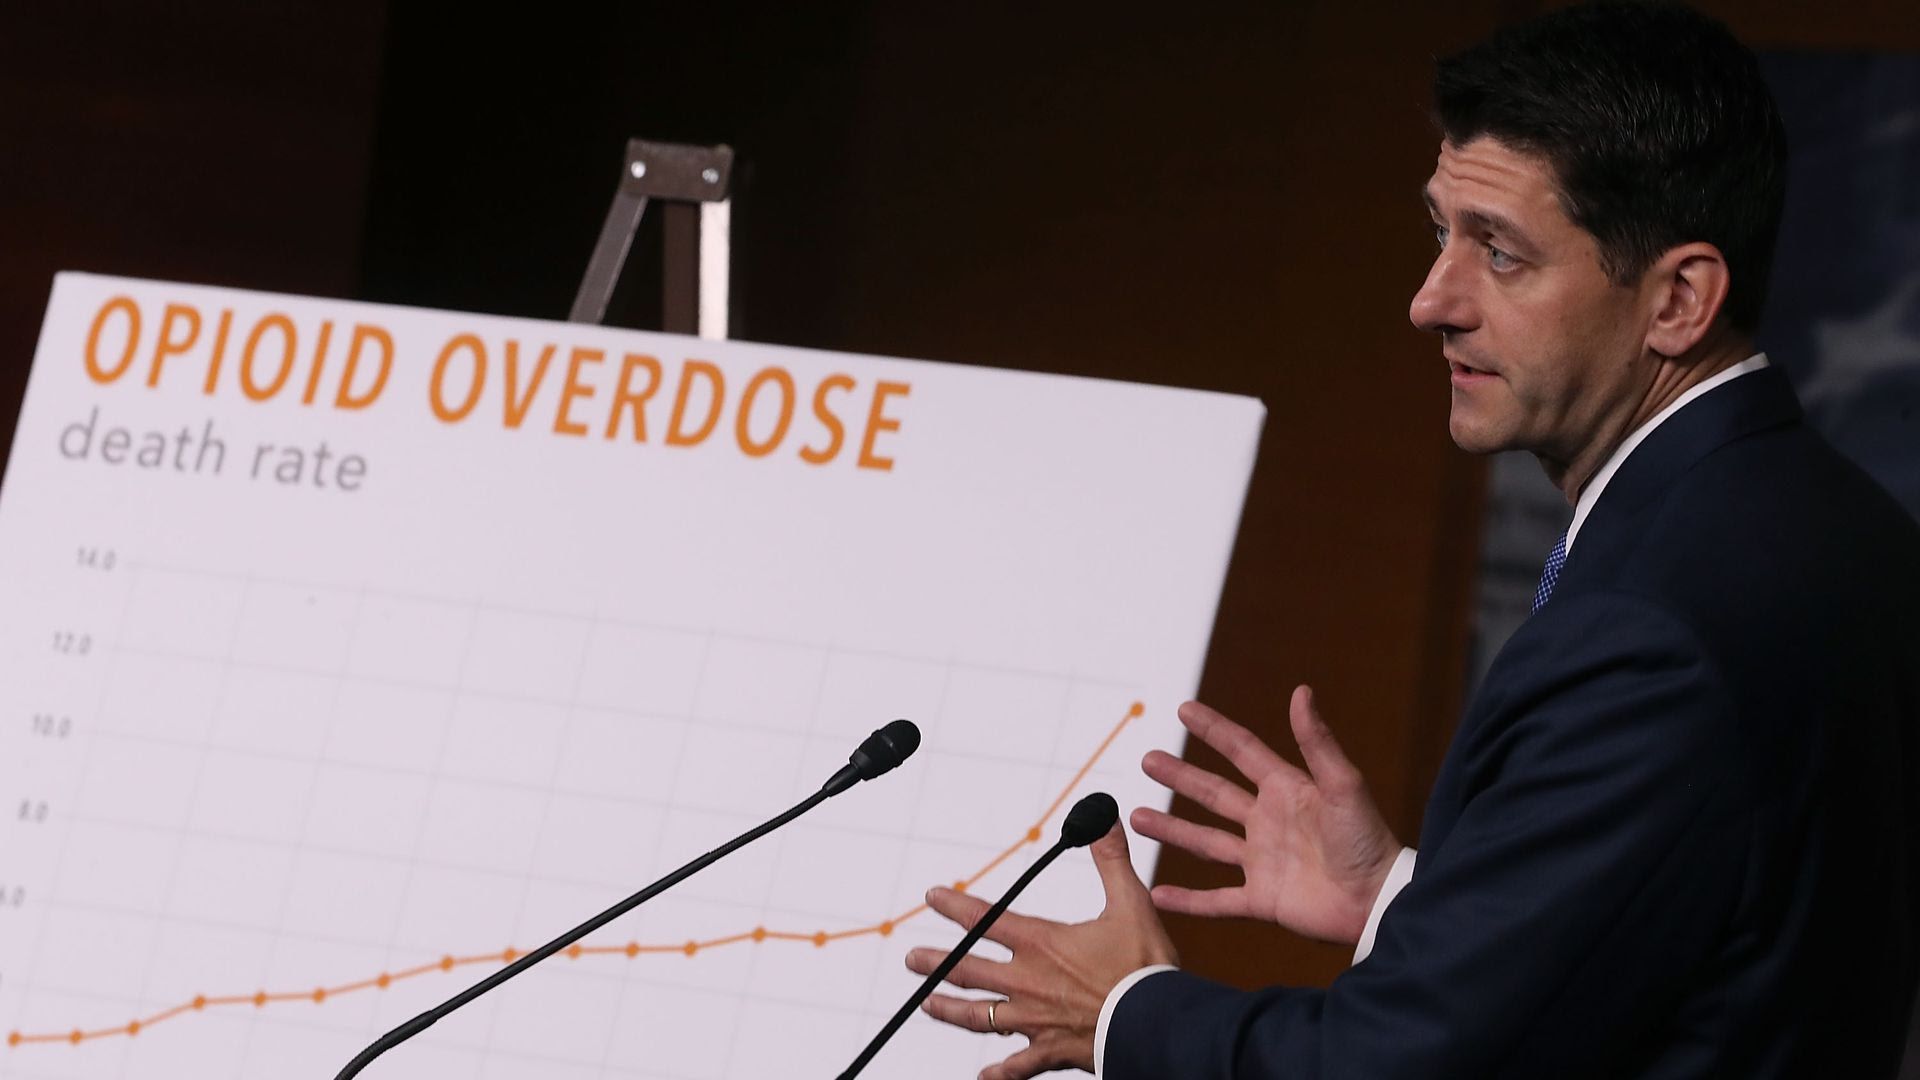 Paul Ryan gesturing to a board that says "opioid overdoses"